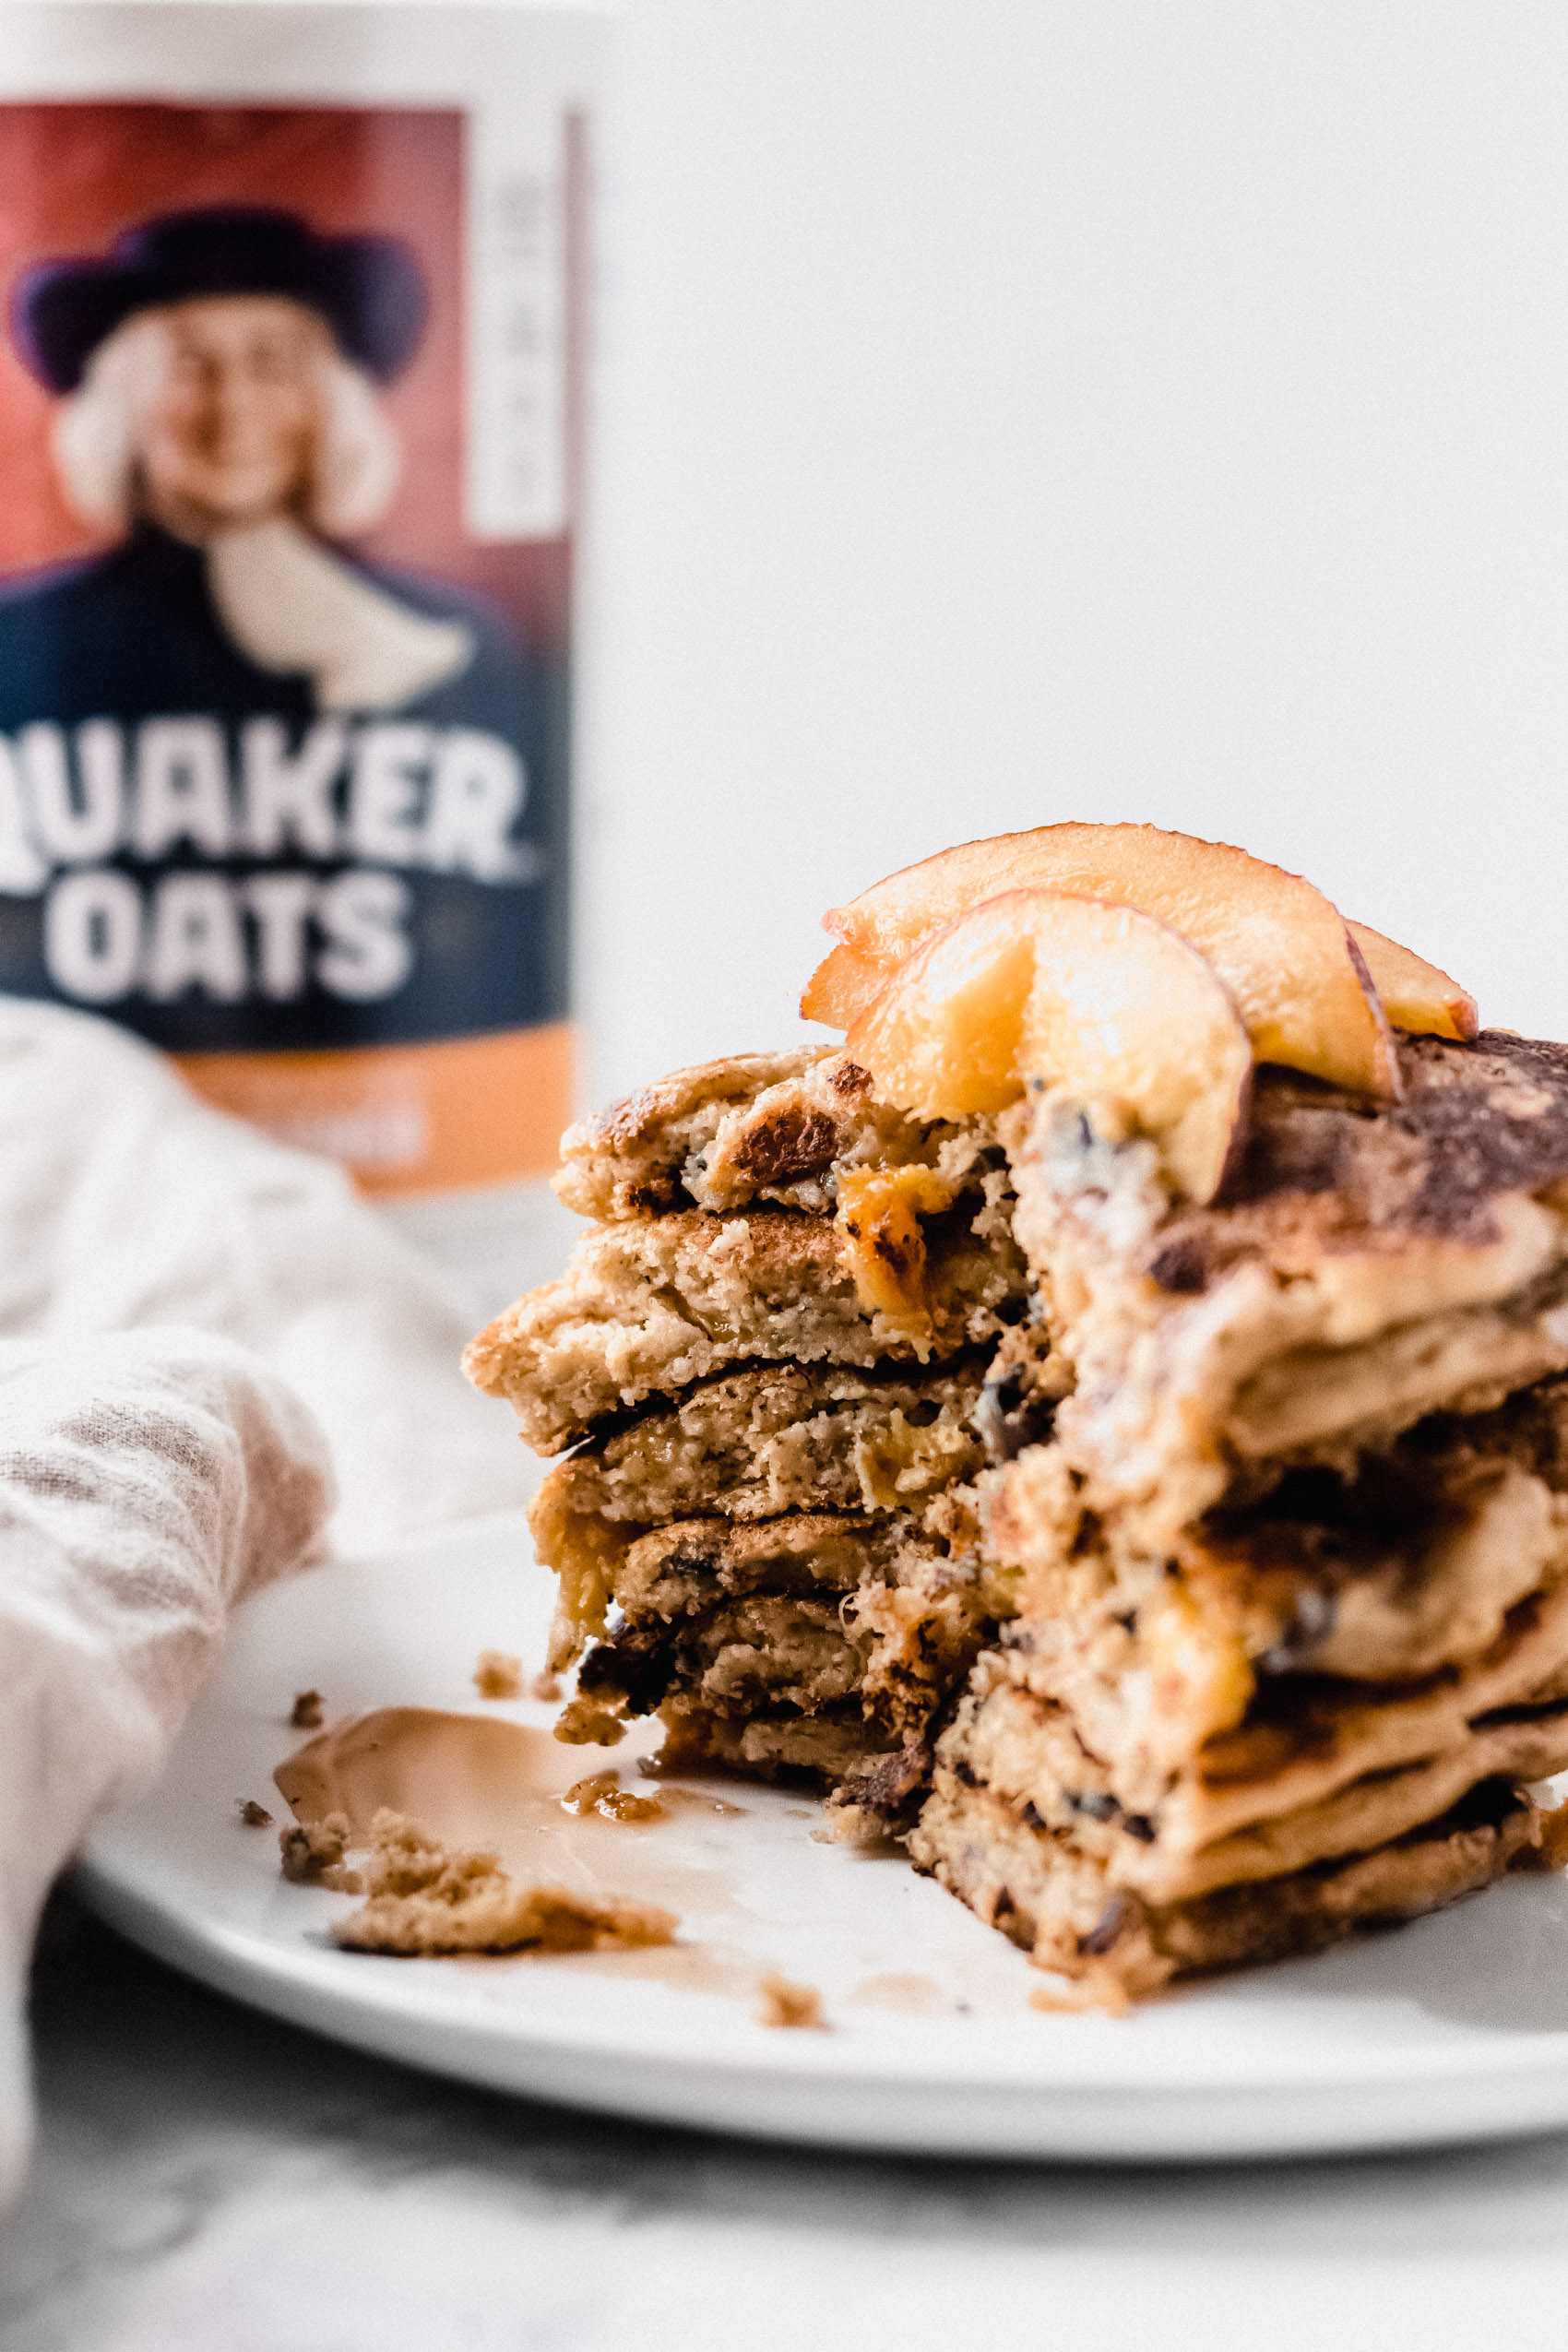 a stack of pancakes with a slice taken out and a carton of oats behind them